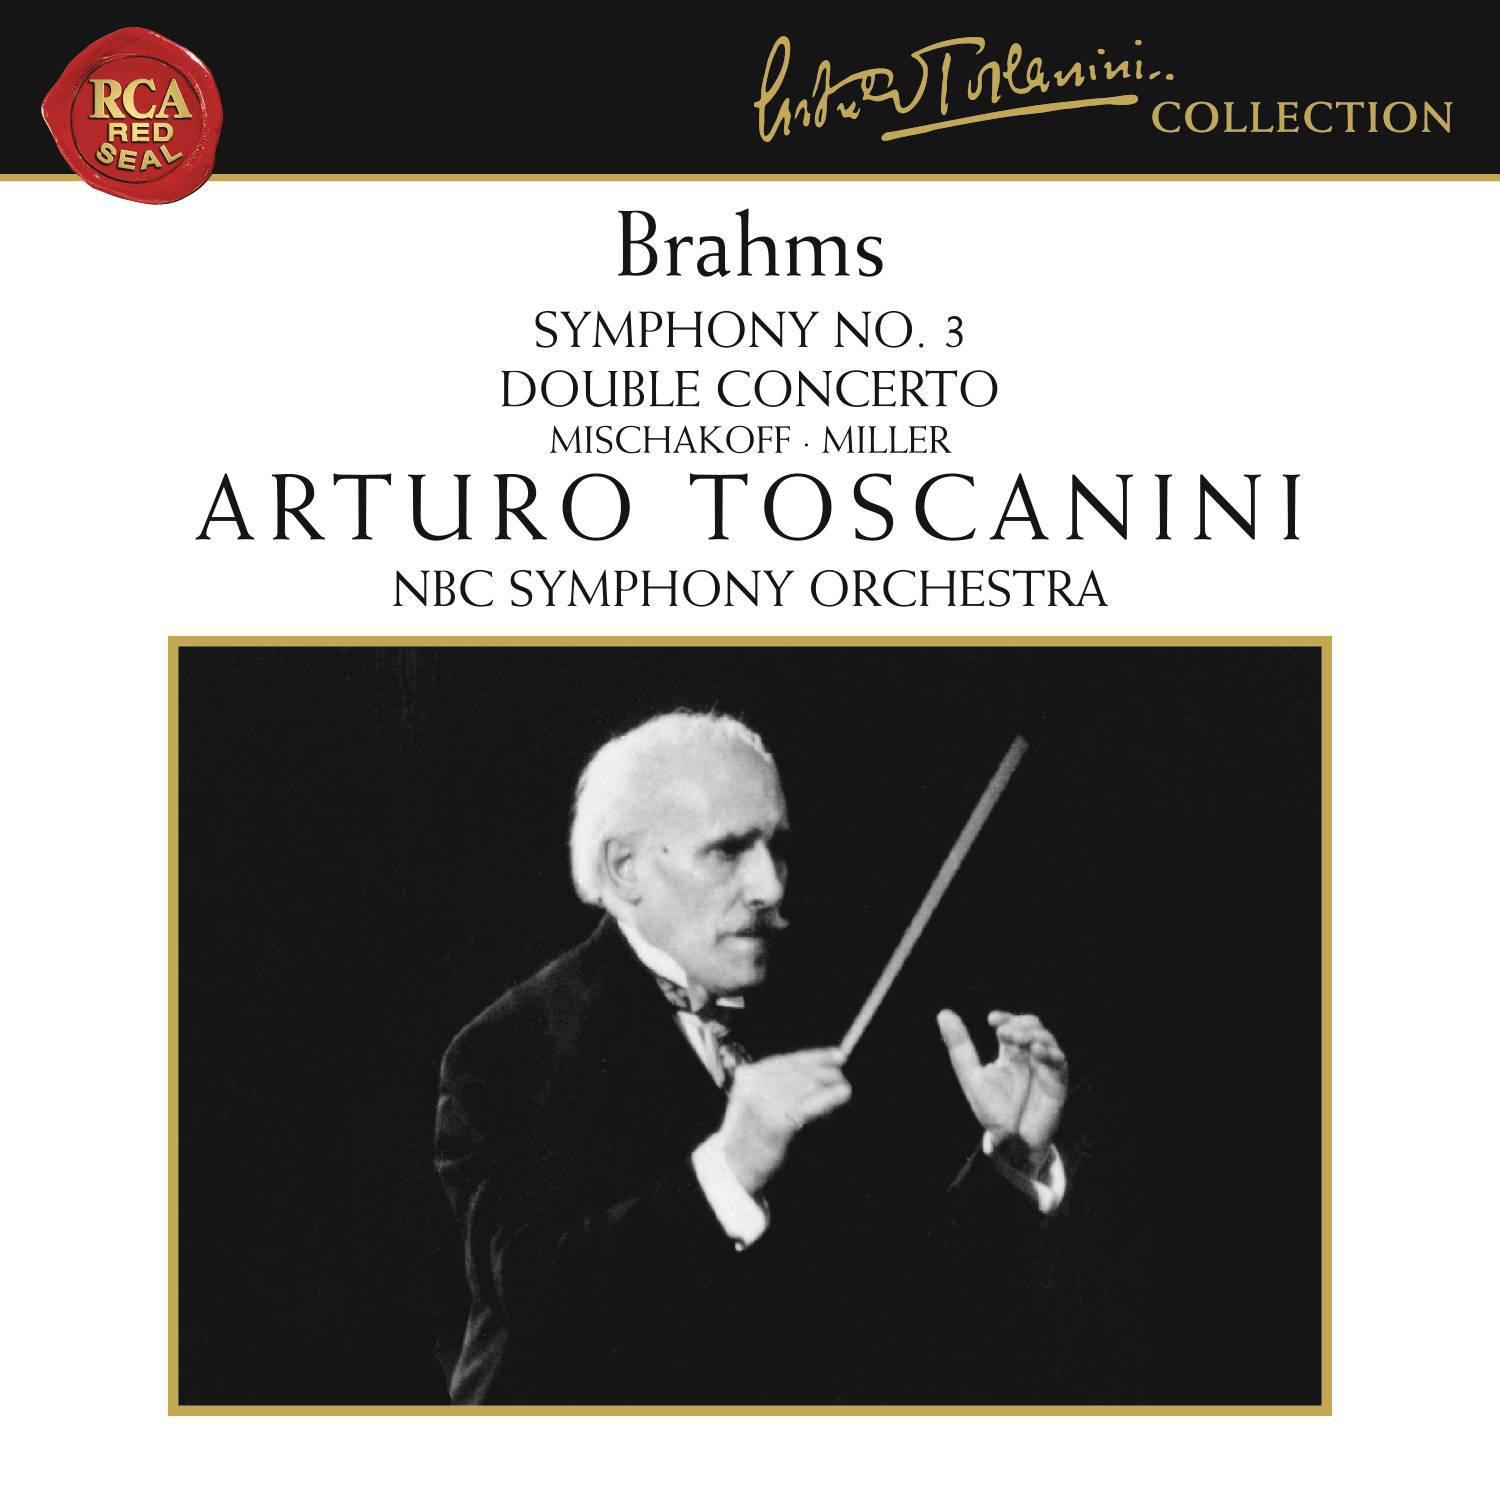 Brahms: Symphony No. 3 in F Major, Op. 90 & Concerto for Violin and Cello in A Minor, Op. 102